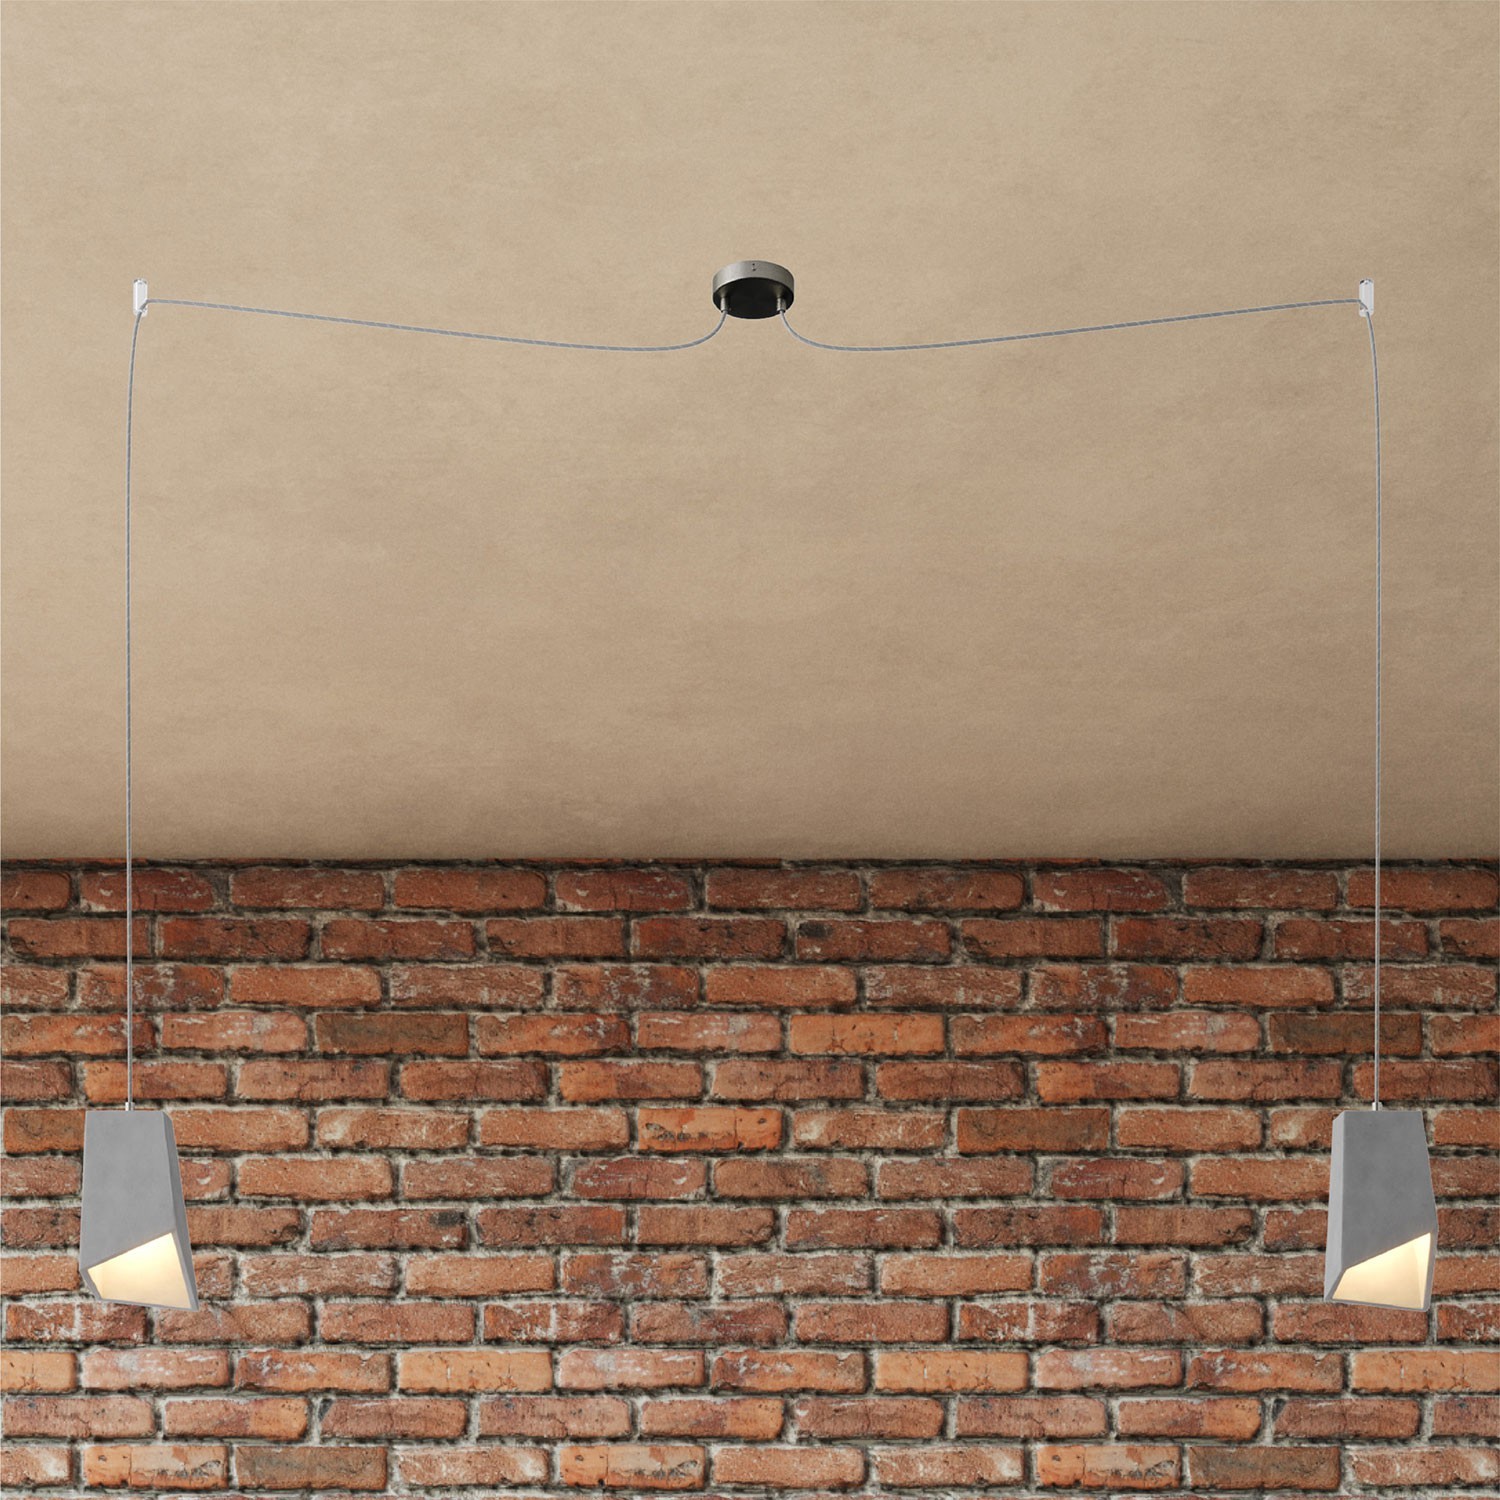 Spider - 2-light multi-pendant Made in Italy lamp featuring fabric cable and concrete lampshade